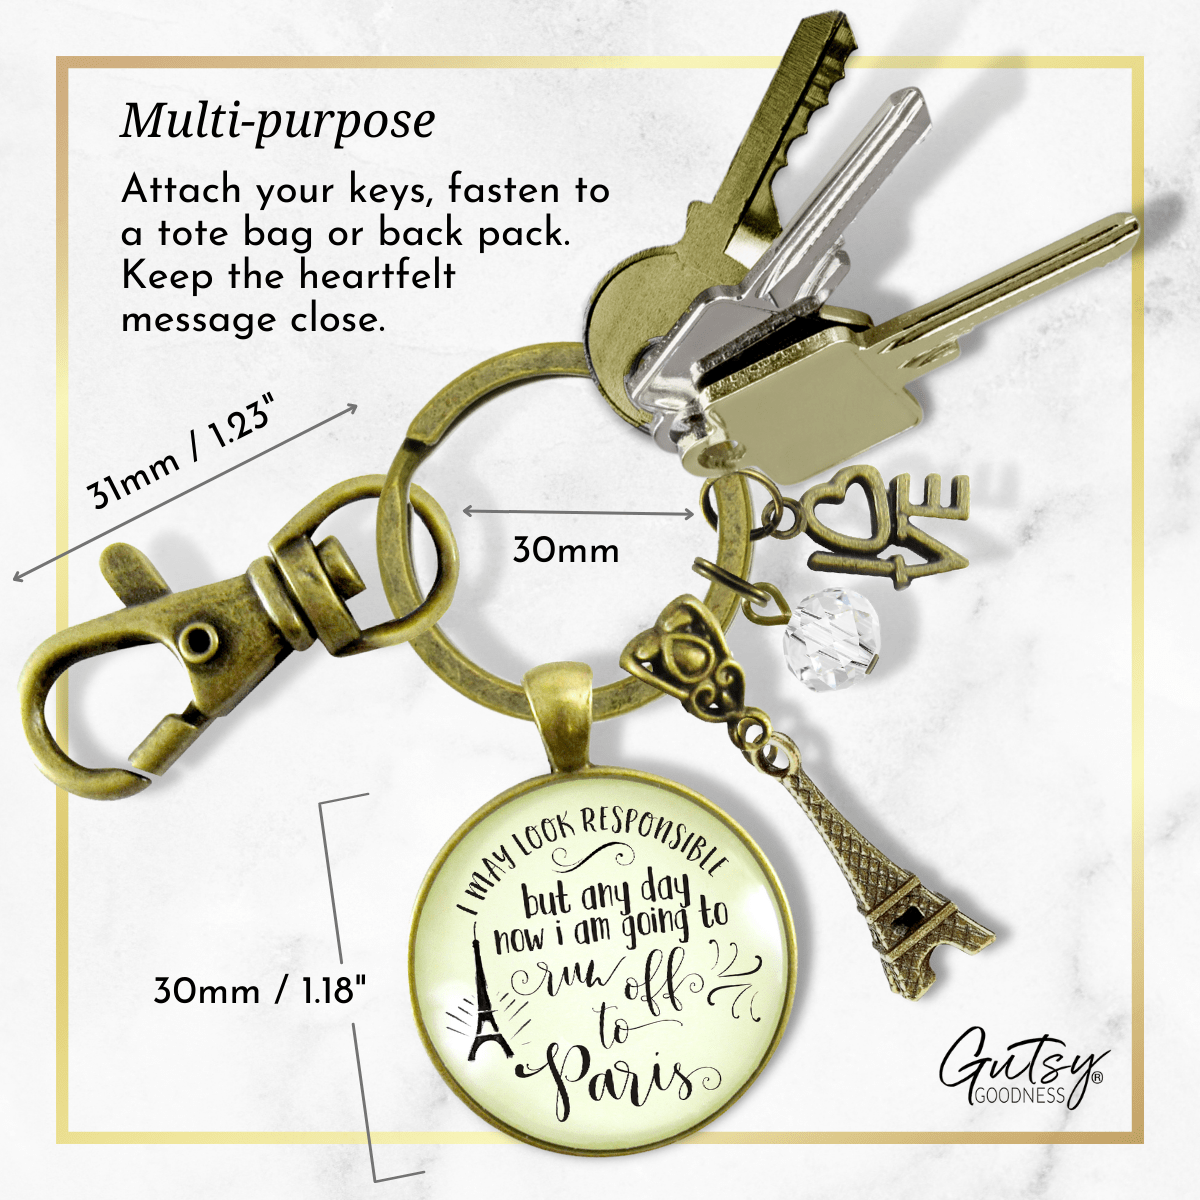 Paris Keychain I May look Responsible France Jewelry Glam Quote Gift Eiffel Tower - Gutsy Goodness Handmade Jewelry;Paris Keychain I May Look Responsible France Jewelry Glam Quote Gift Eiffel Tower - Gutsy Goodness Handmade Jewelry Gifts